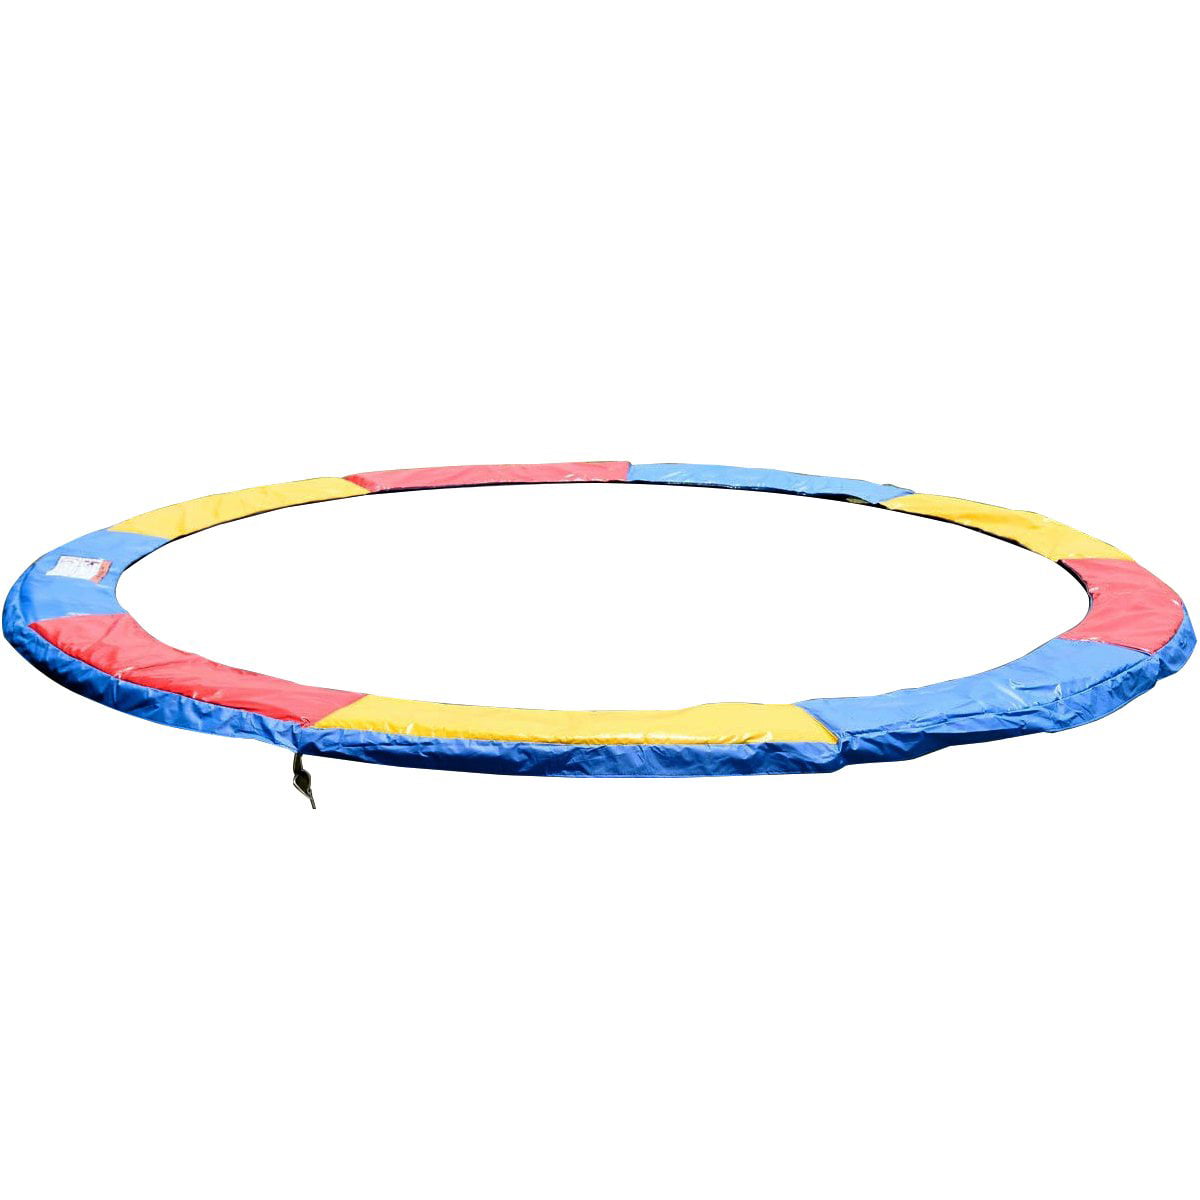 14 FT Trampoline Safety Pad EPE Foam Spring Cover Frame Replacement Multi Color 